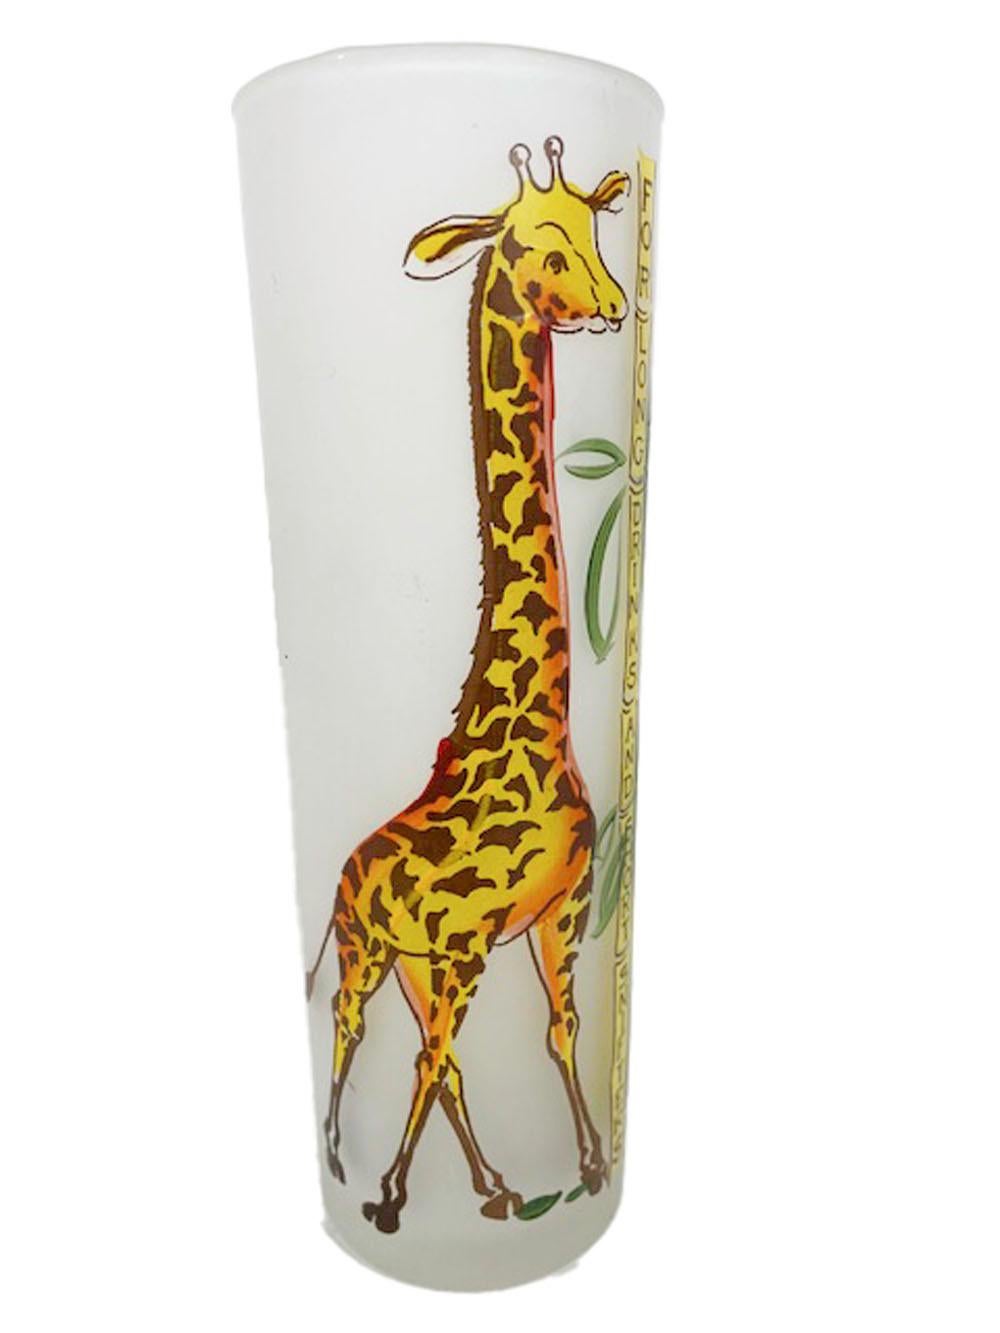 American Vintage Tiki / Zombie Glasses Giraffes Painted by Gay Fad on Libbey Glass Blanks For Sale